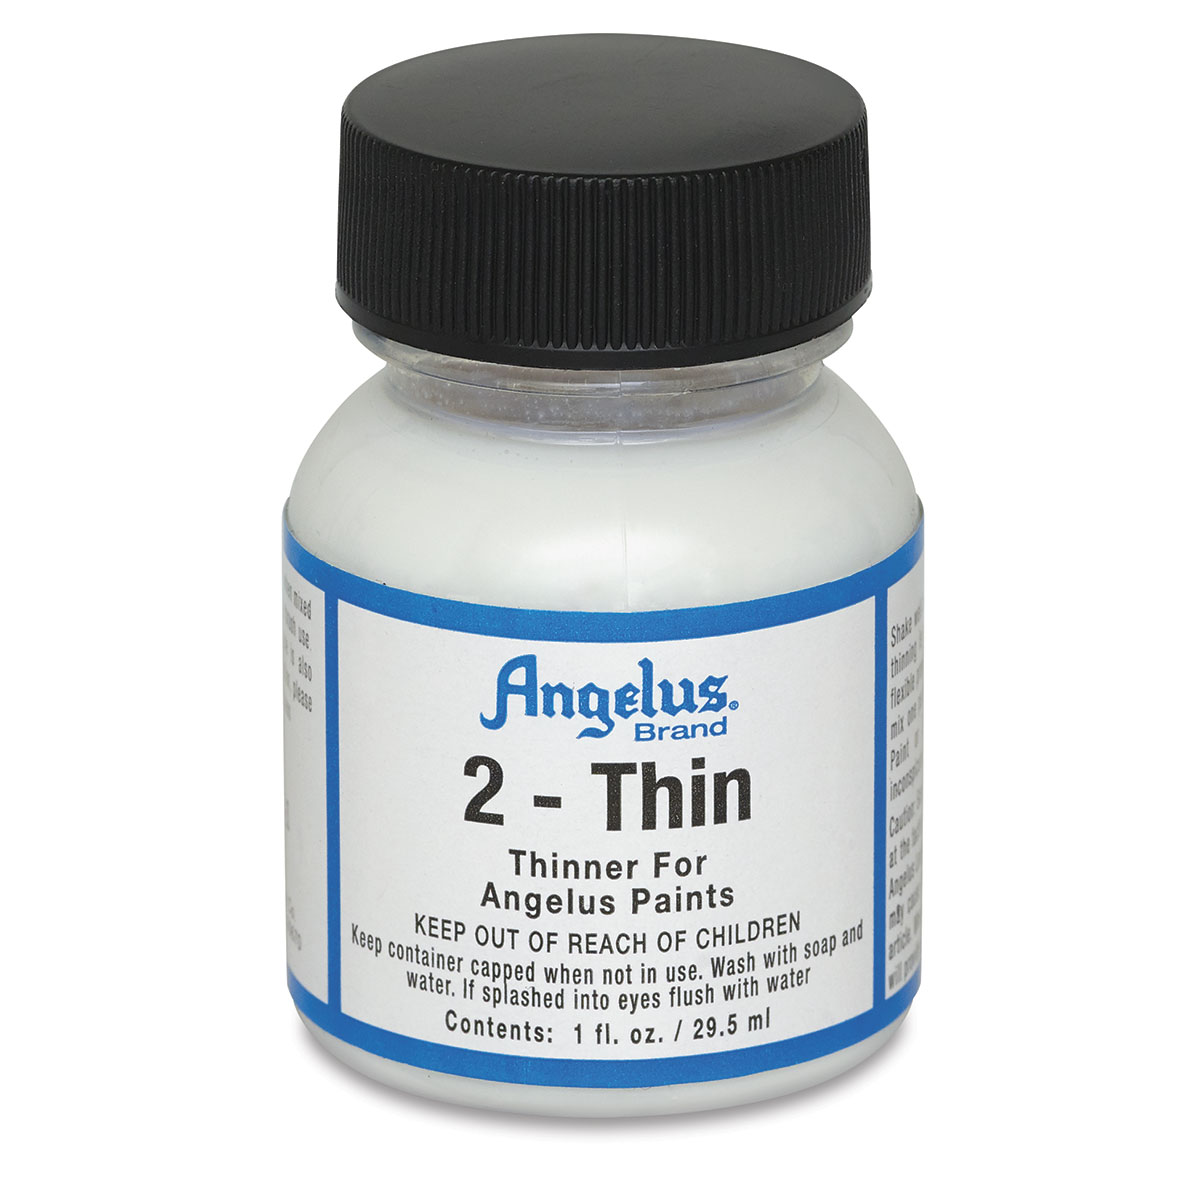 Angelus 2 Thin Paint Additive for Thinning Paint for Airbrush